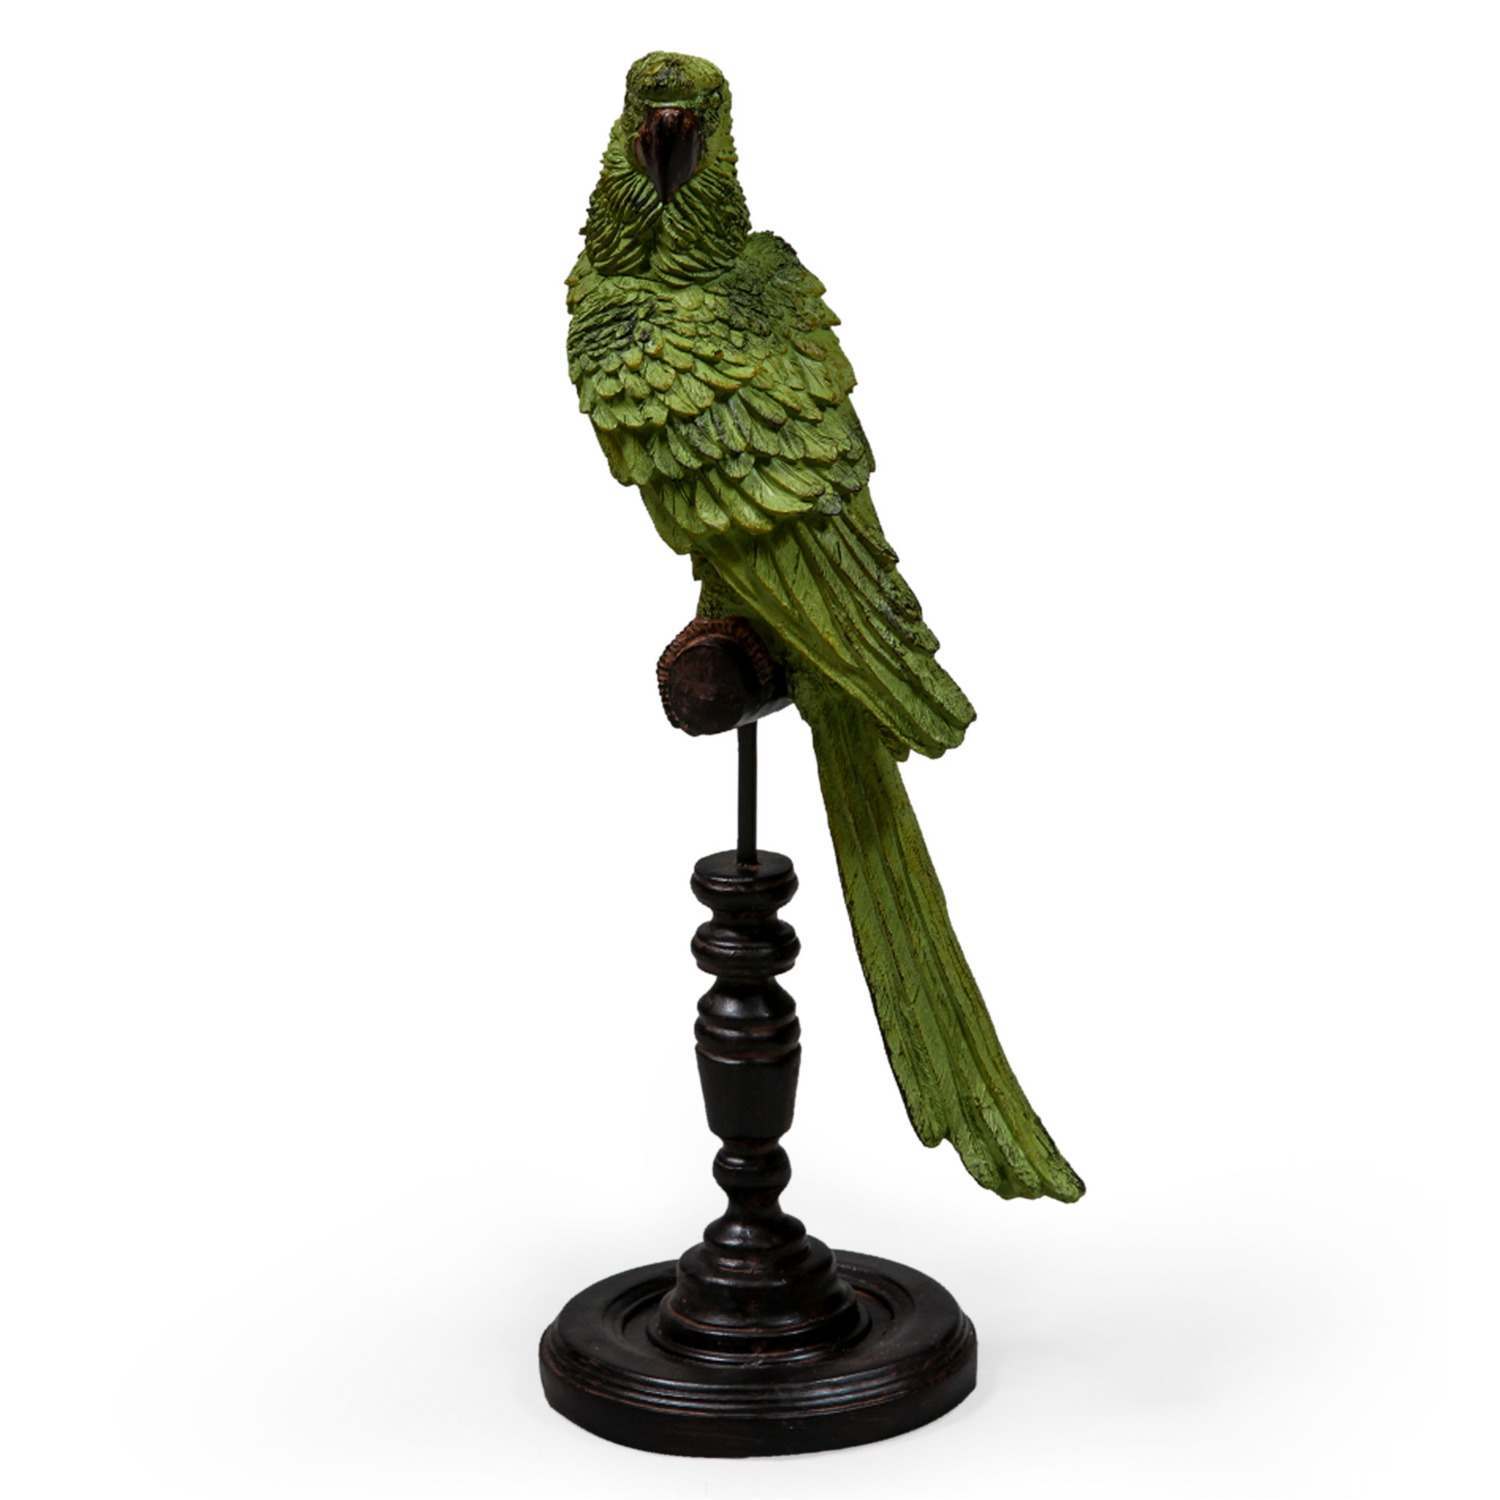 An image of Green Parrot on Perch